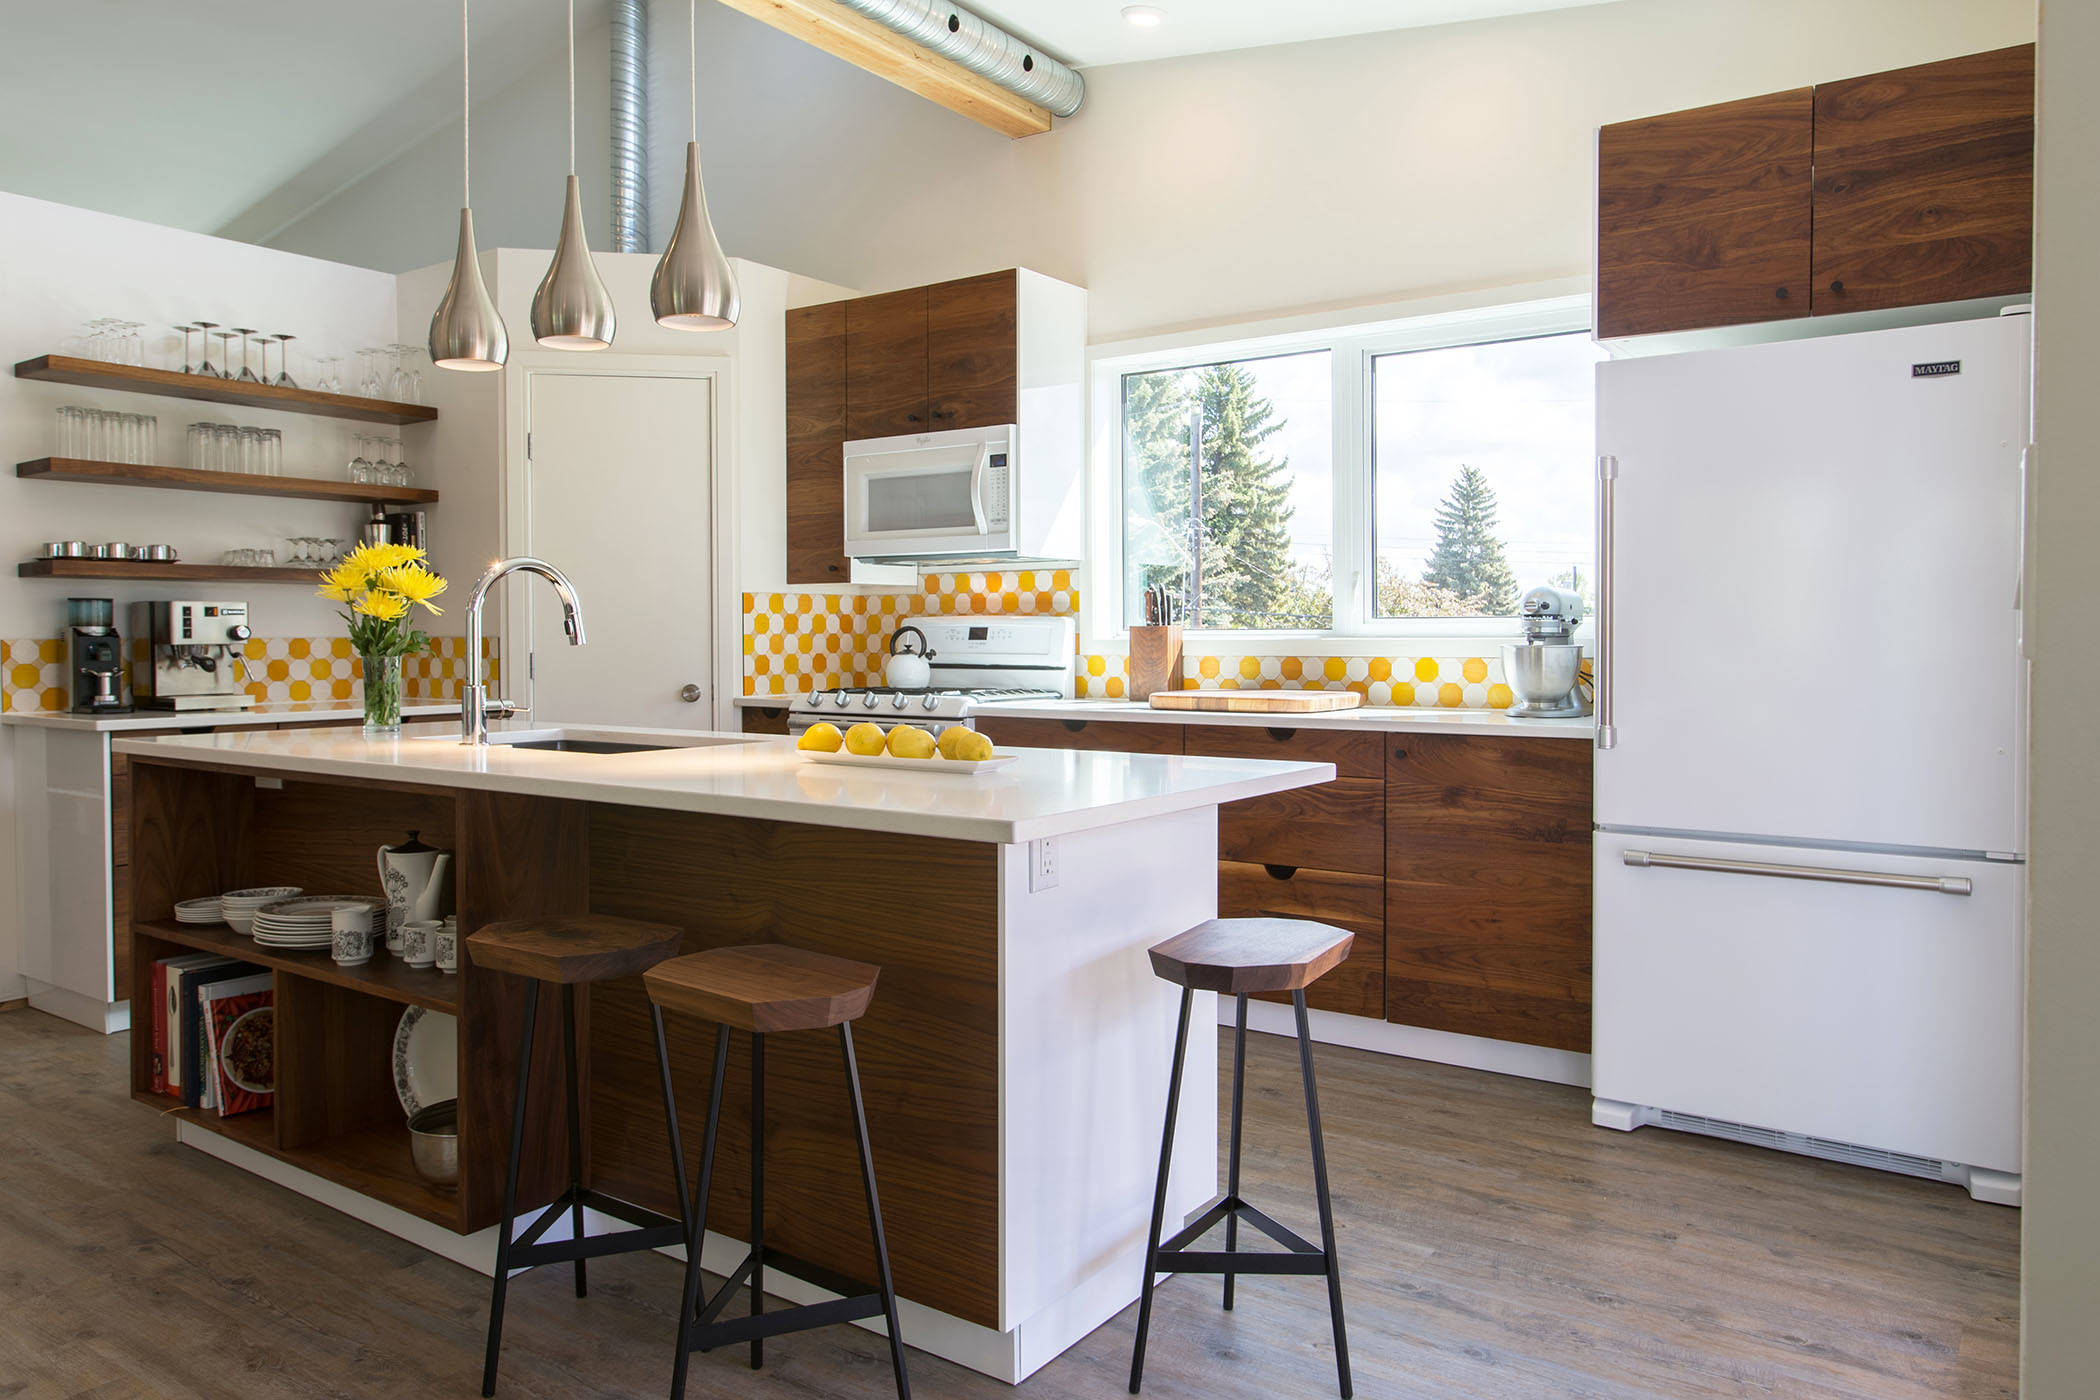 18 Hot Kitchen Renovation Tips & Designs That Will Motivate You To